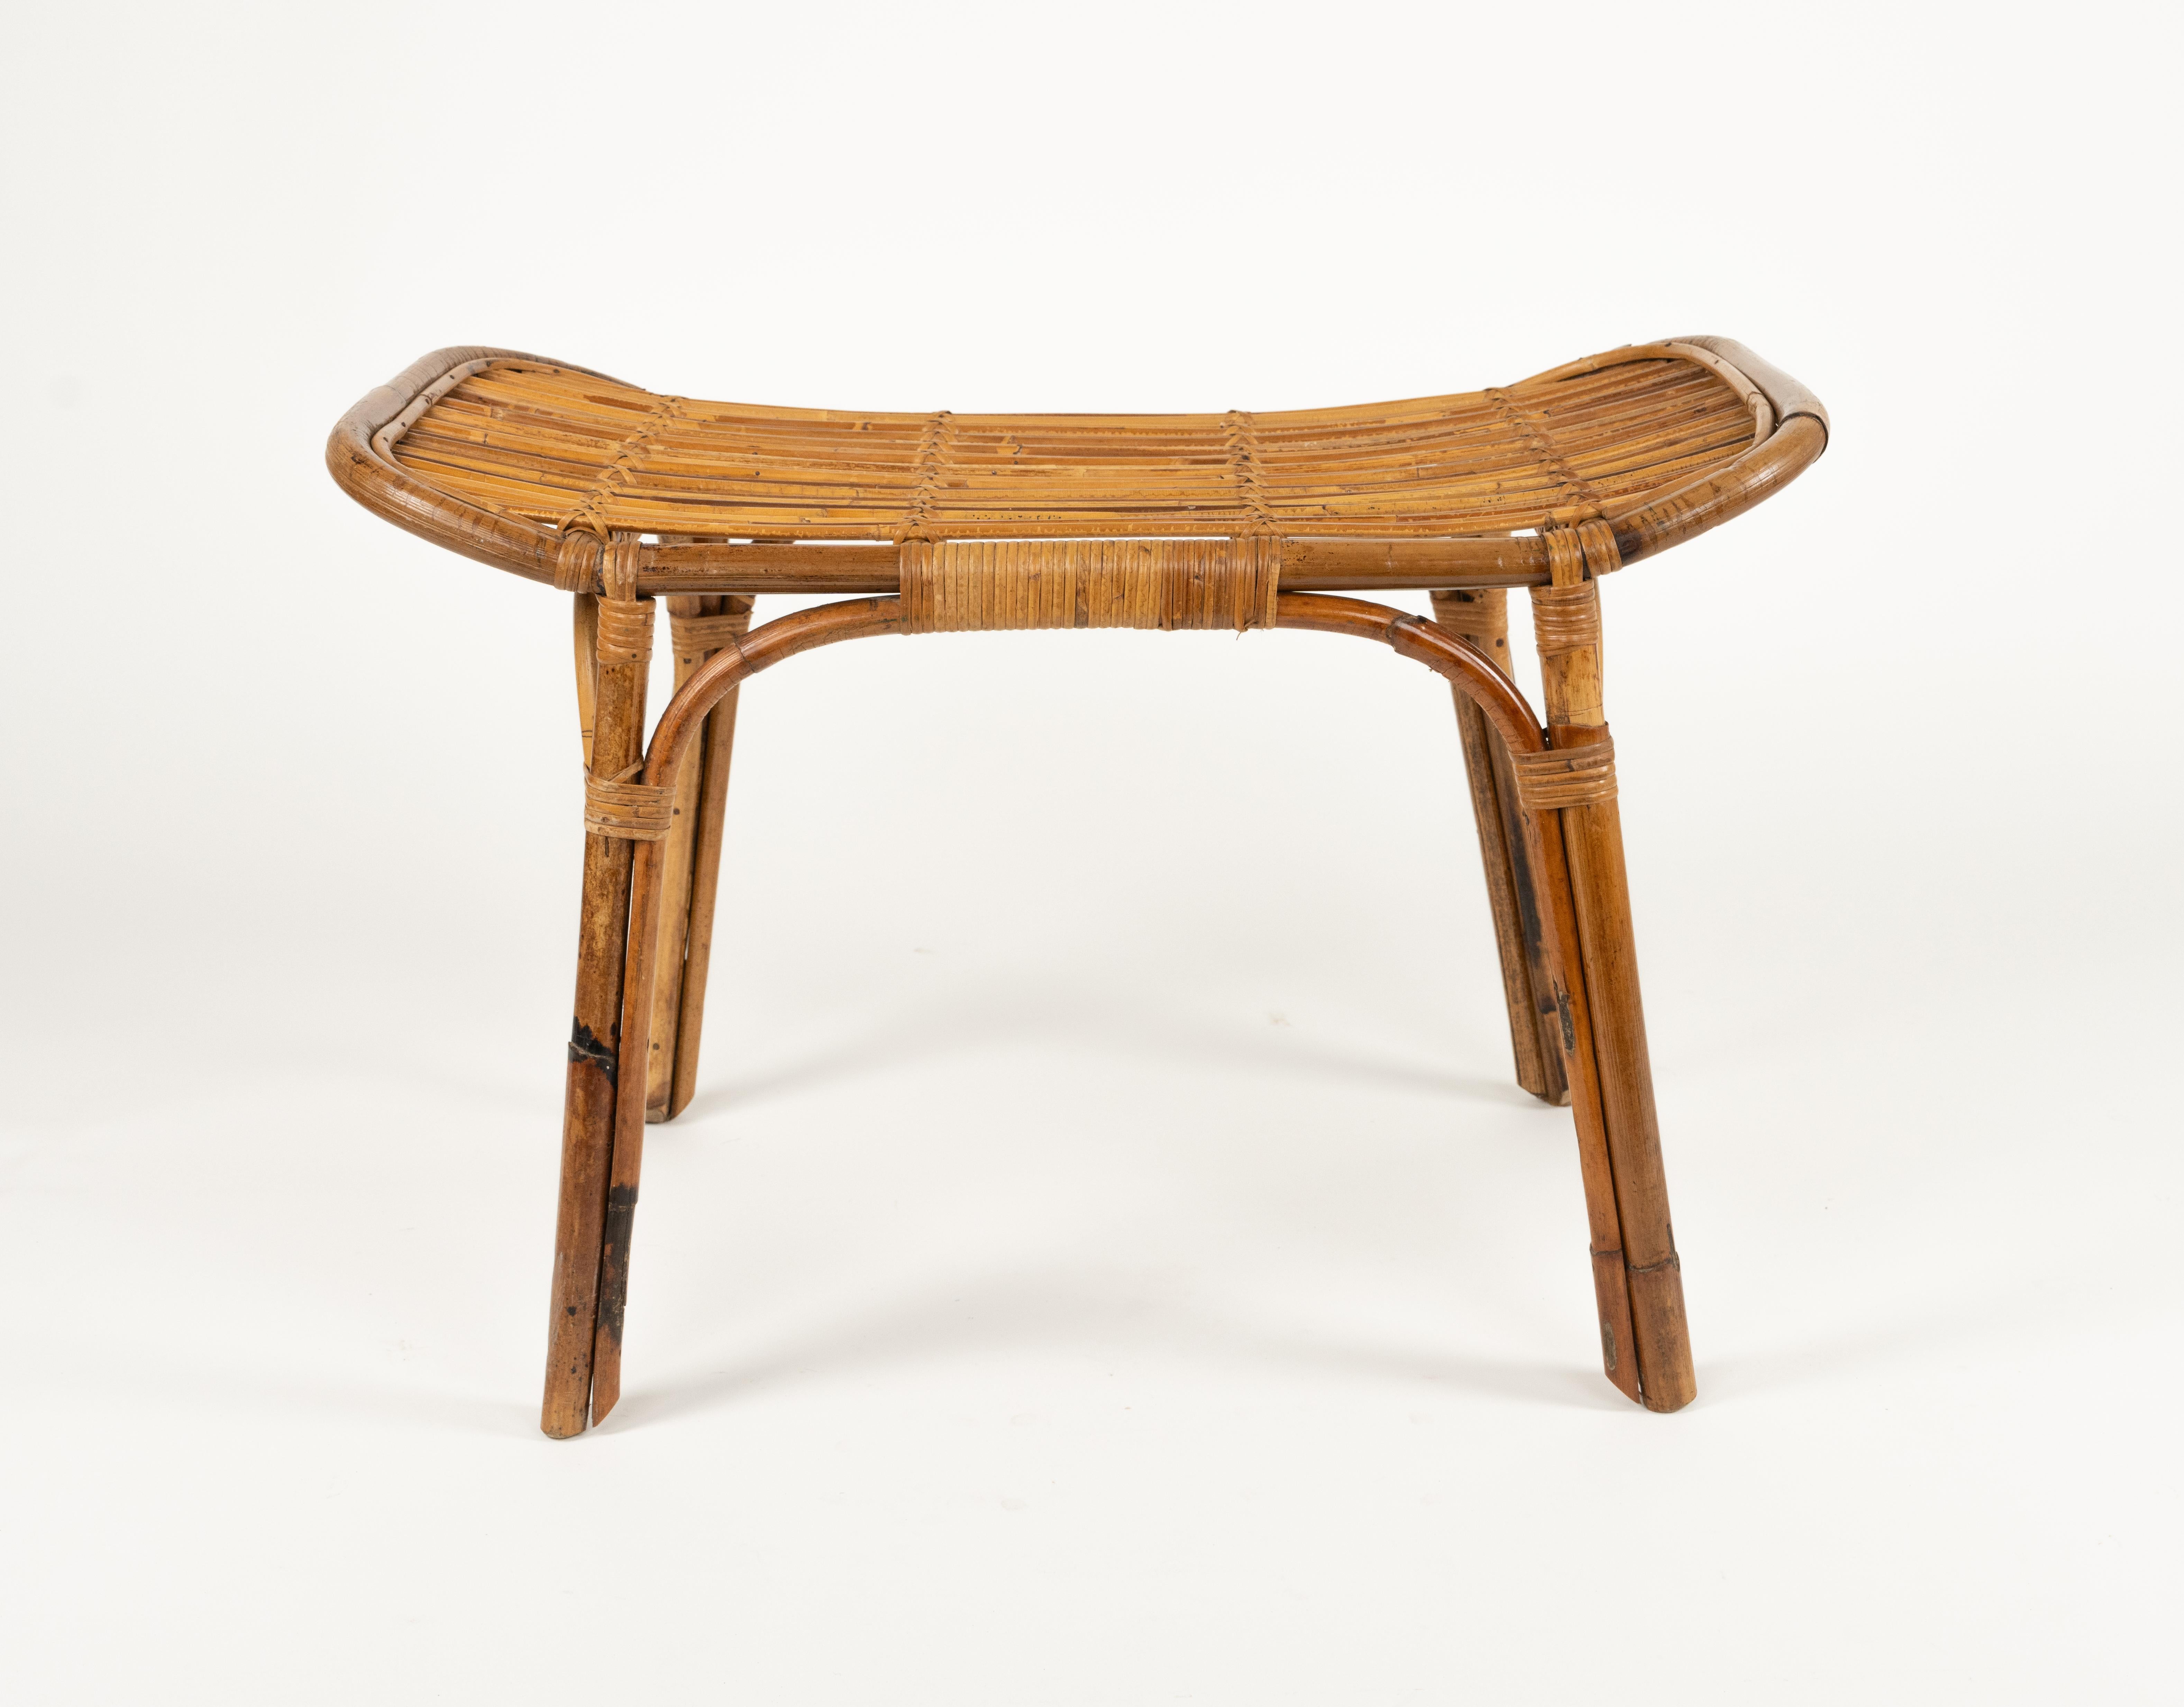 Midcentury Bench or Side Table in Rattan & Bamboo Tito Agnoli Style, Italy 1960s For Sale 7